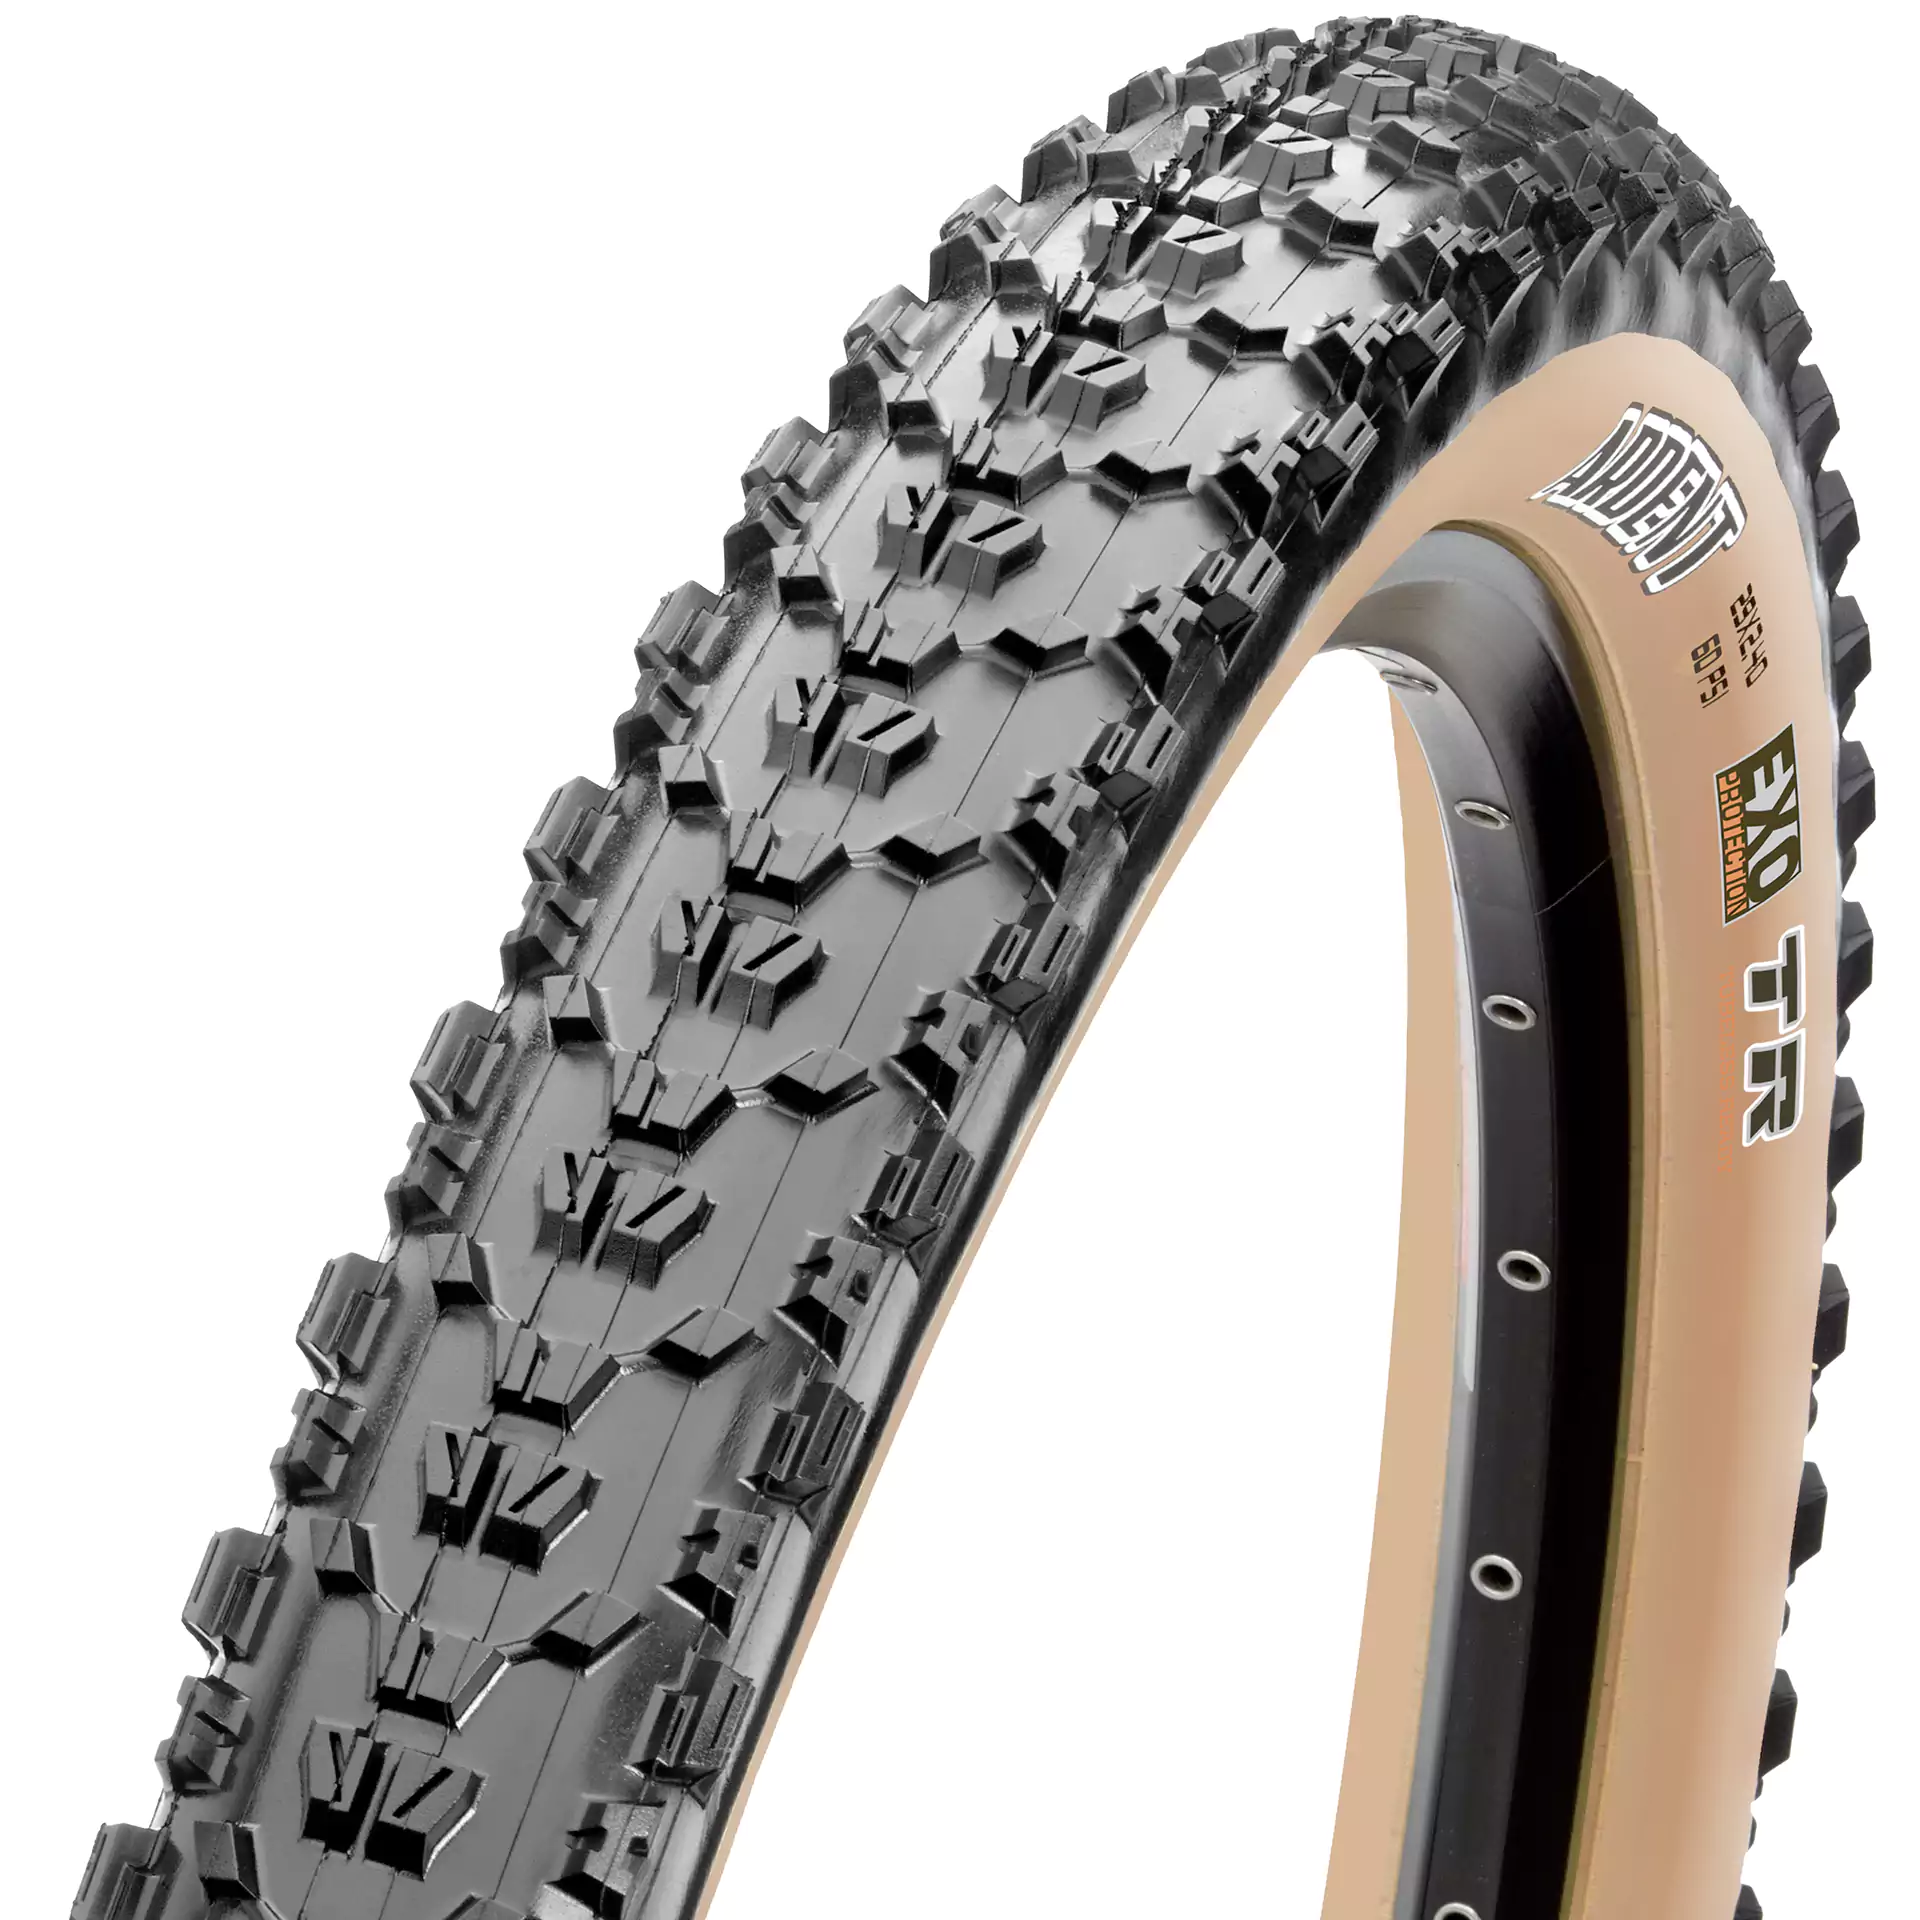 Great on Dirt Road Tubeless Tires Durable 29" x 2.4" Ardent Fldg 60A Tire 